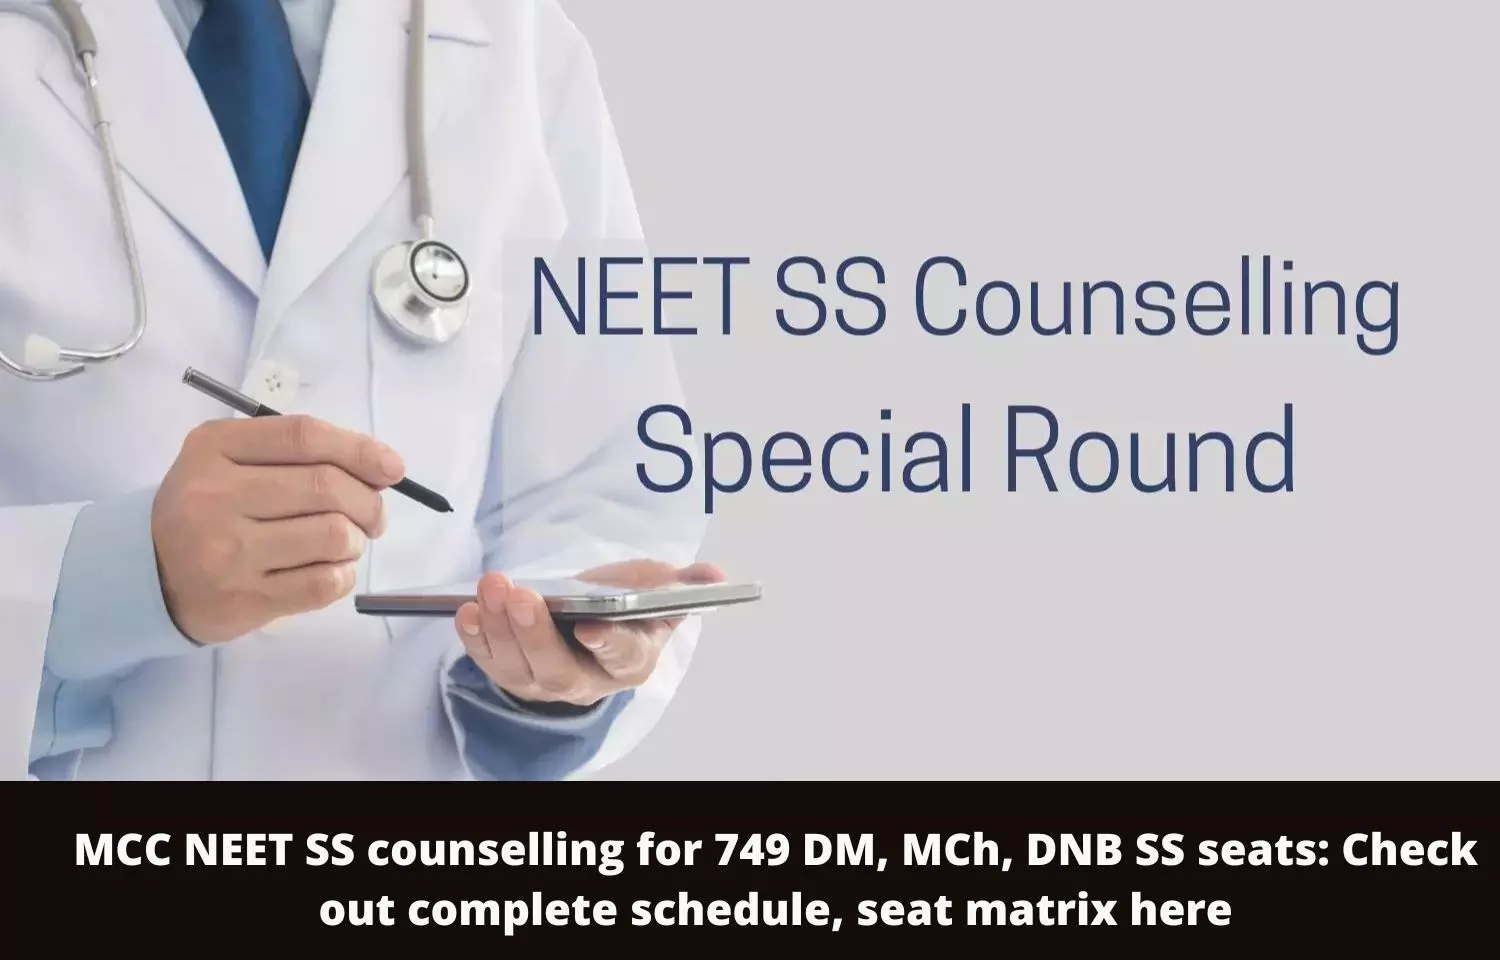 MCC NEET SS counselling for 749 DM, MCh, DNB SS seats: Check out complete schedule, seat matrix here